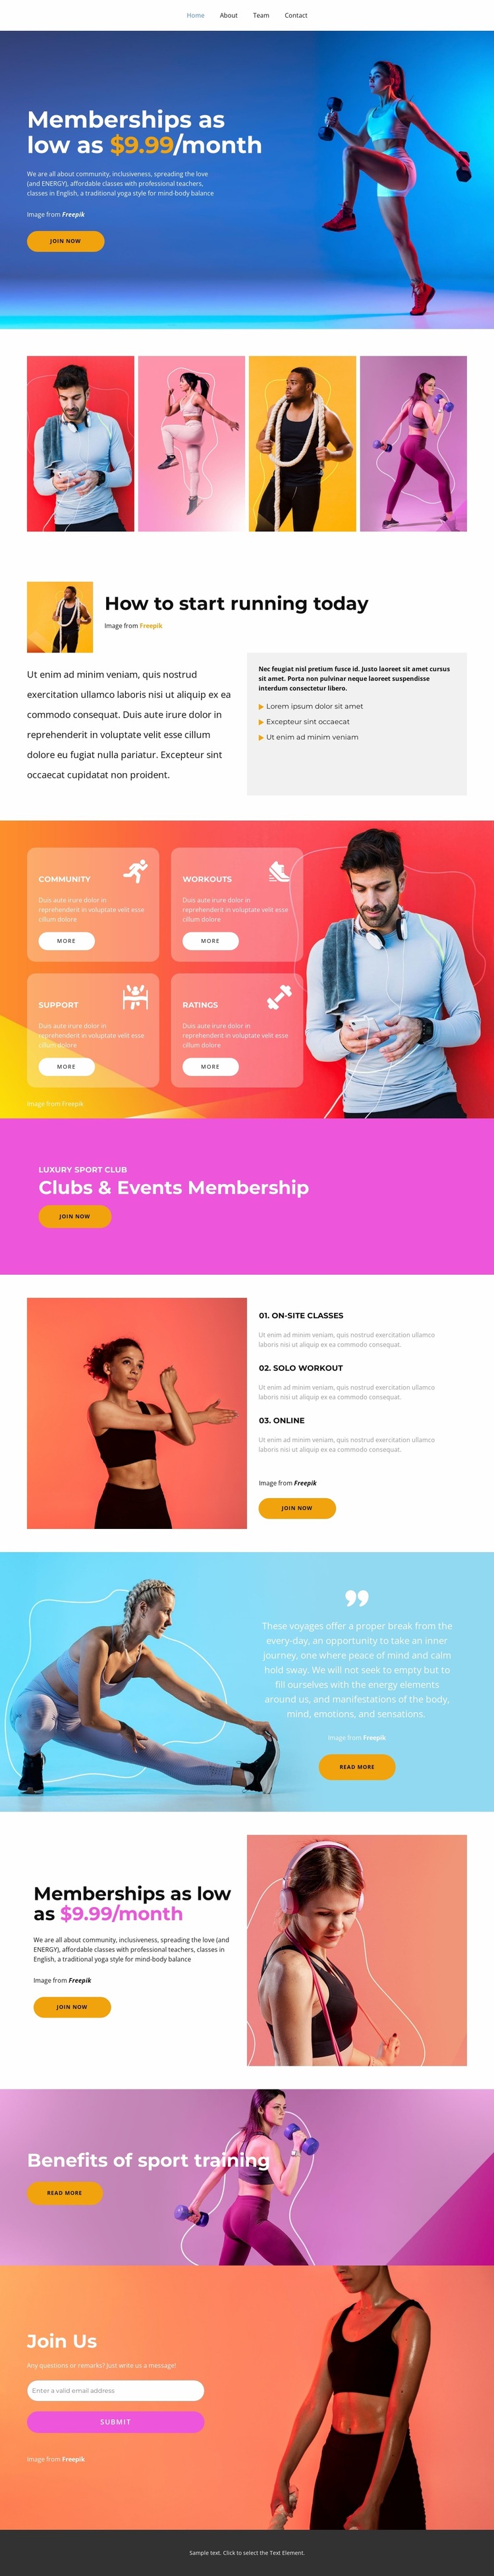 We are a sport club Website Builder Templates